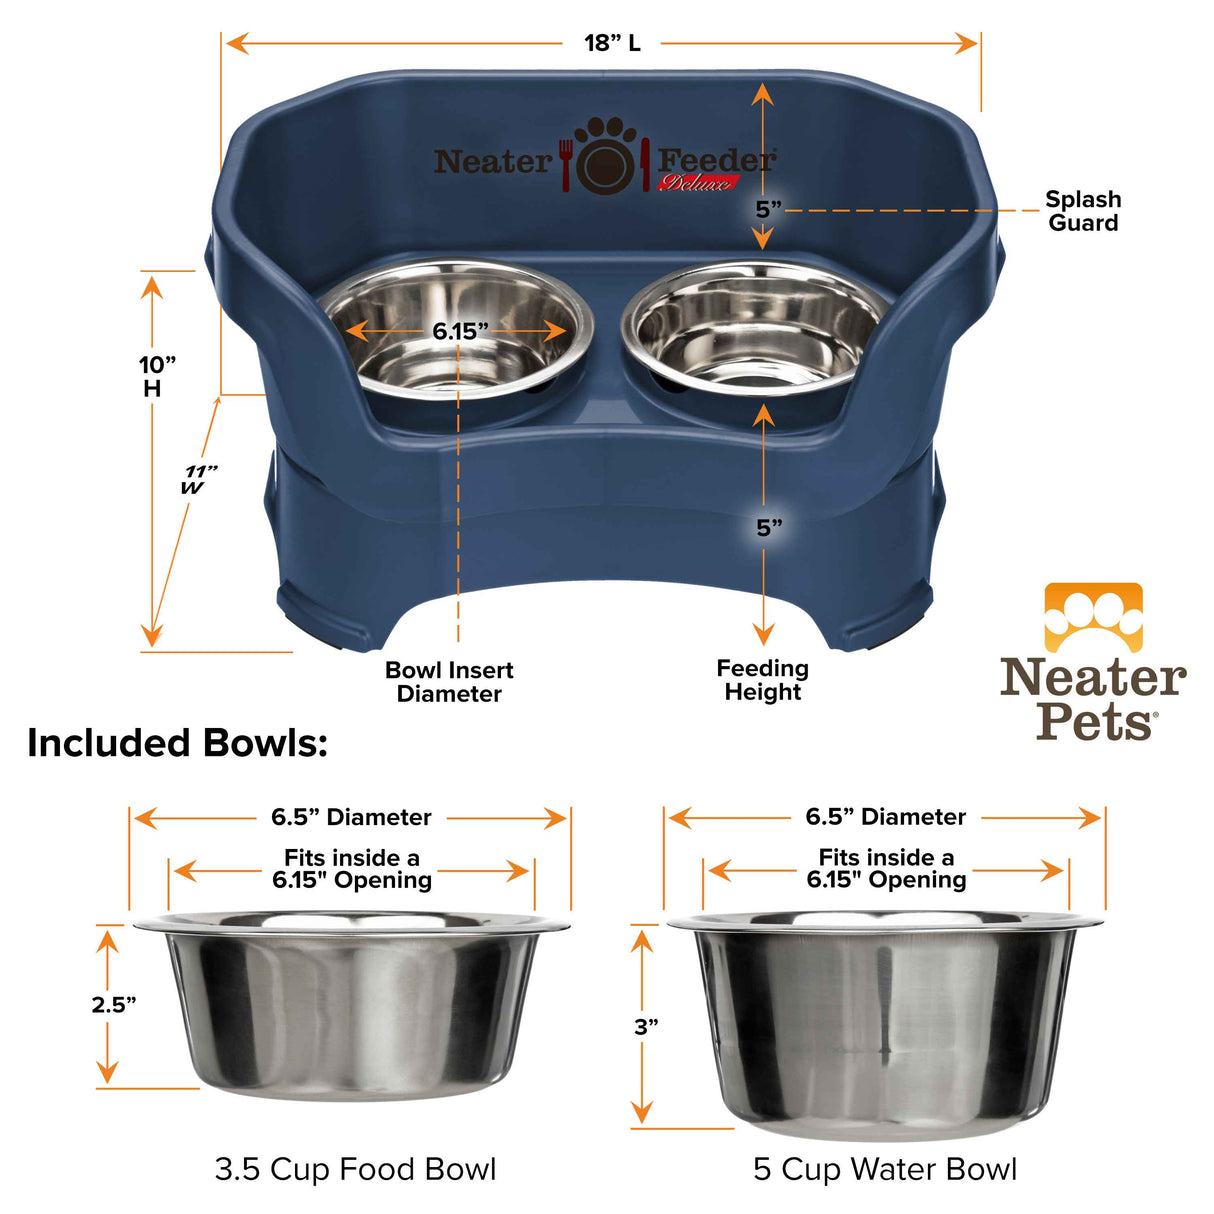 Deluxe Dark Blue Medium Dog Neater Feeder and Bowl dimensions